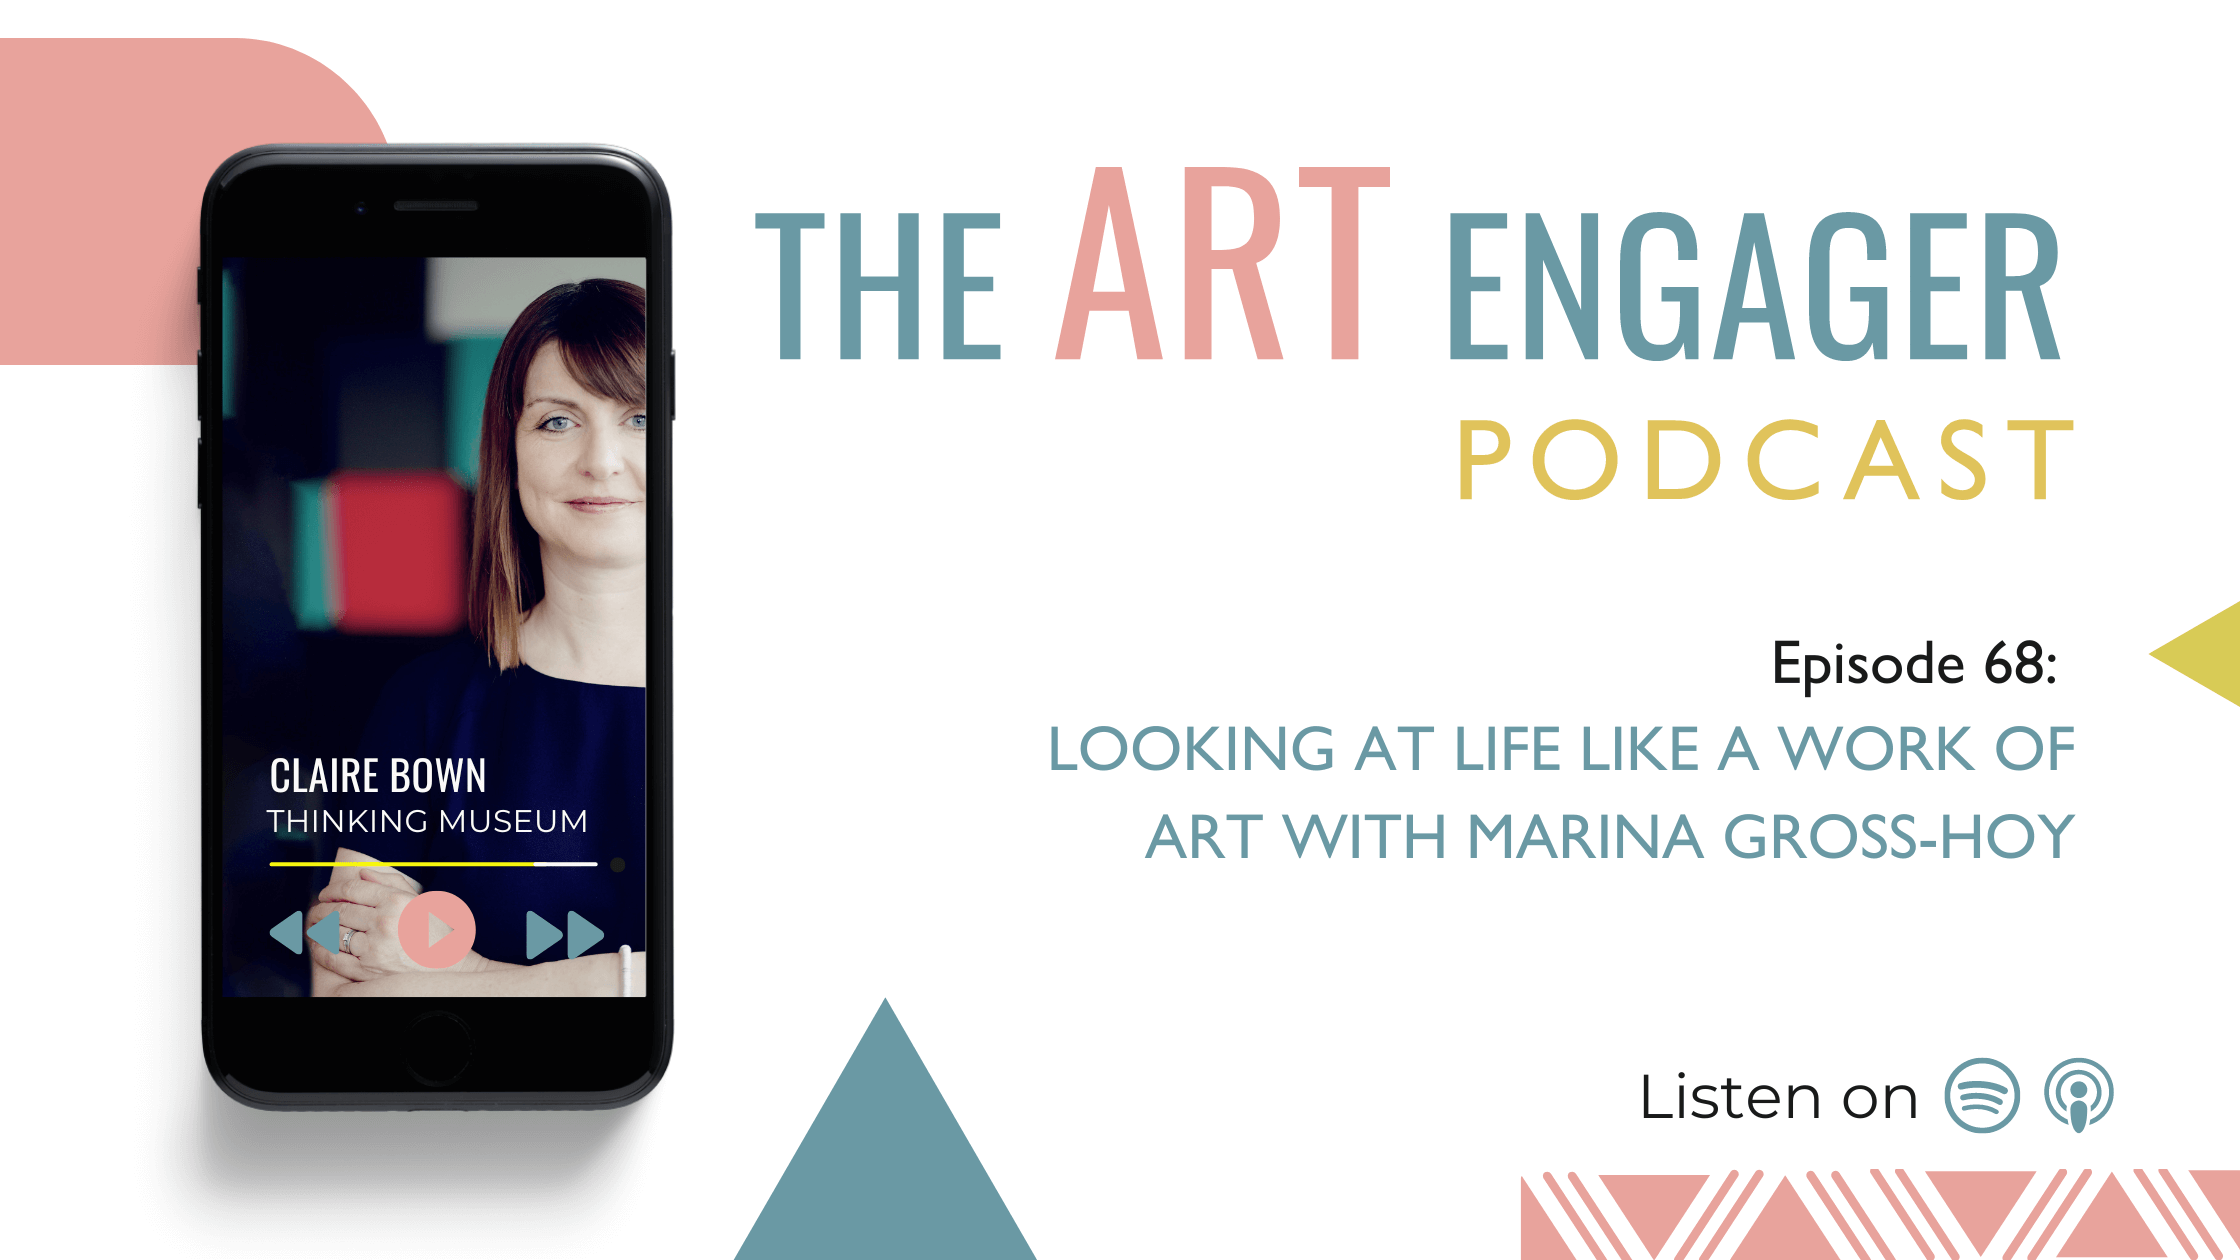 LOOKING AT LIFE LIKE A WORK OF ART with MARINA GROSS HOY